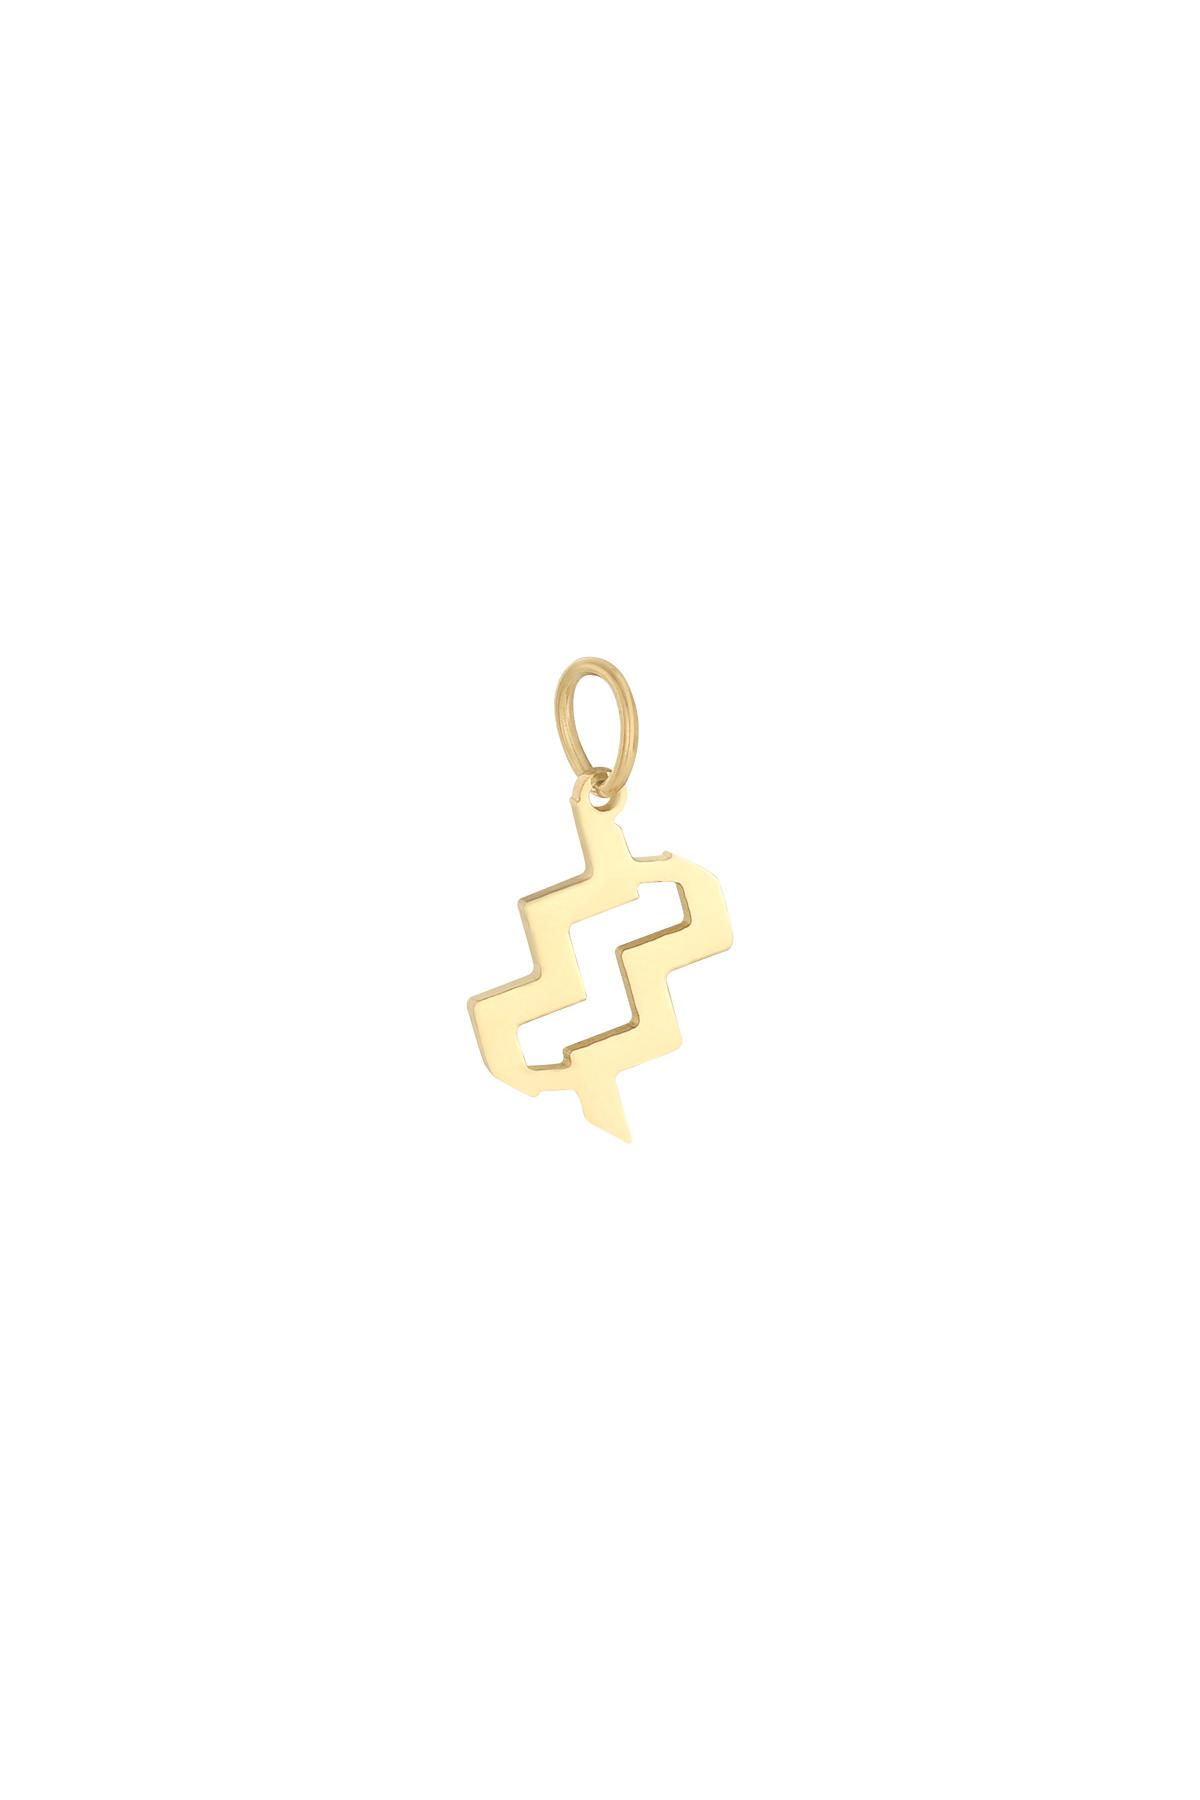 Gold / Charm Zodiac Aquarius Gold Stainless Steel Picture10